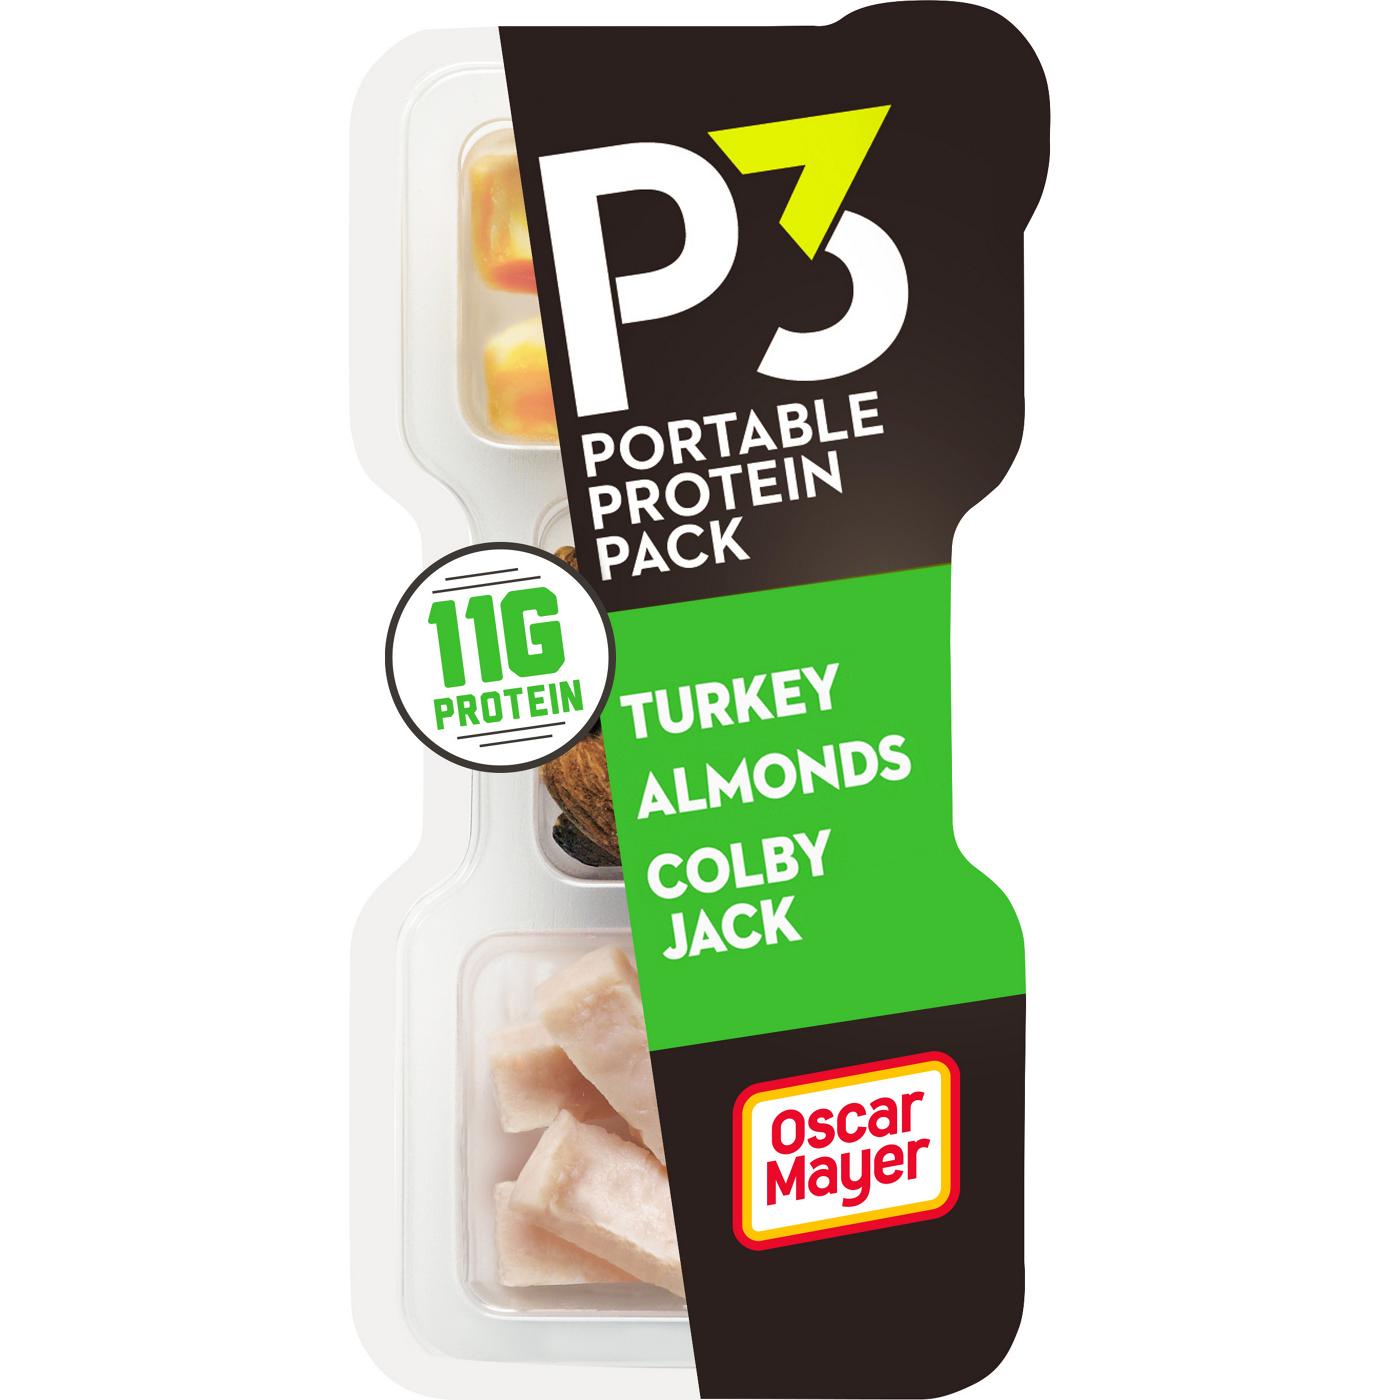 P3 Portable Protein Pack Snack Tray - Turkey, Almonds & Colby Jack; image 1 of 4